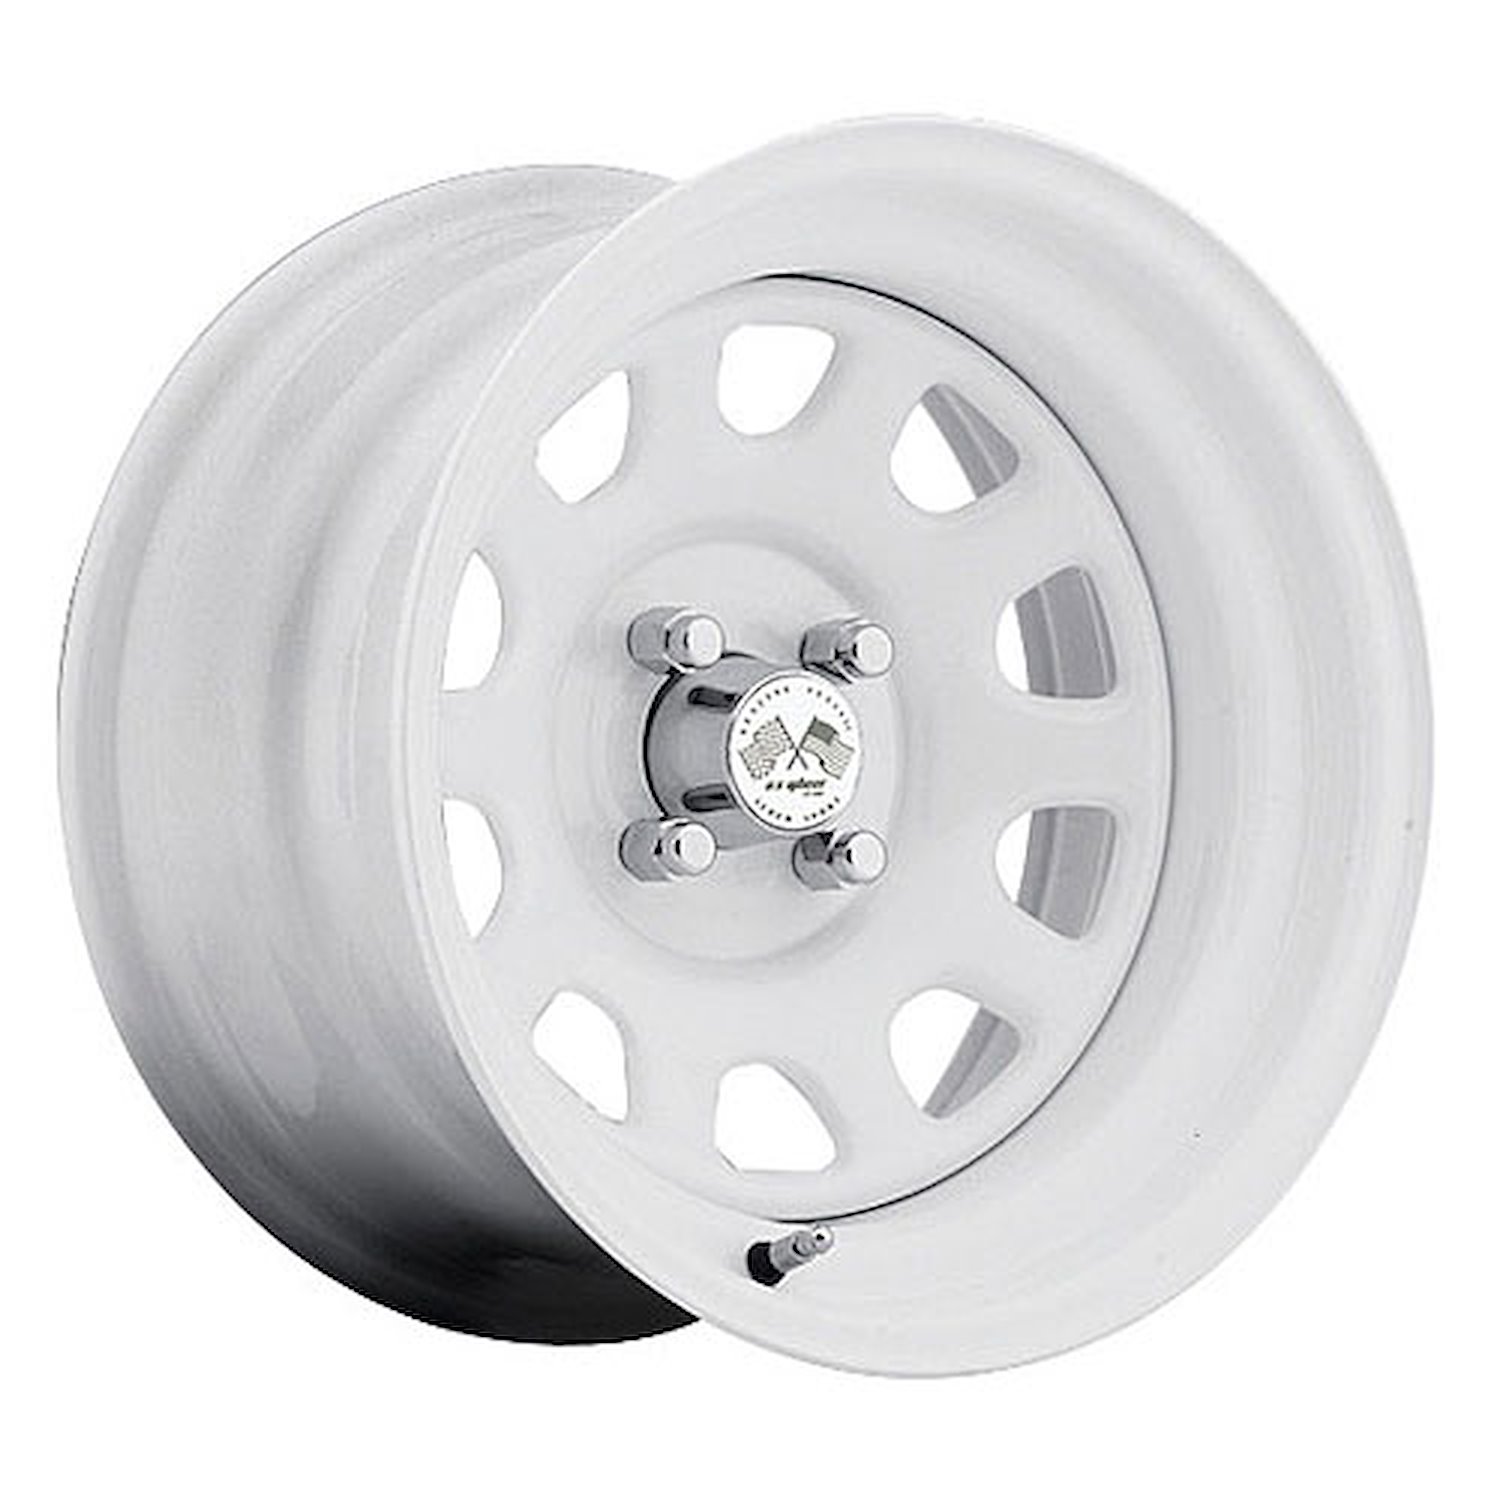 PAINTED DAYTONA FWD DRIFTER WHITE 15 x 10 4 x 45 Bolt Circle 5 12 Back Spacing 0 offset 266 Center Bore 1400 lbs Load Rating